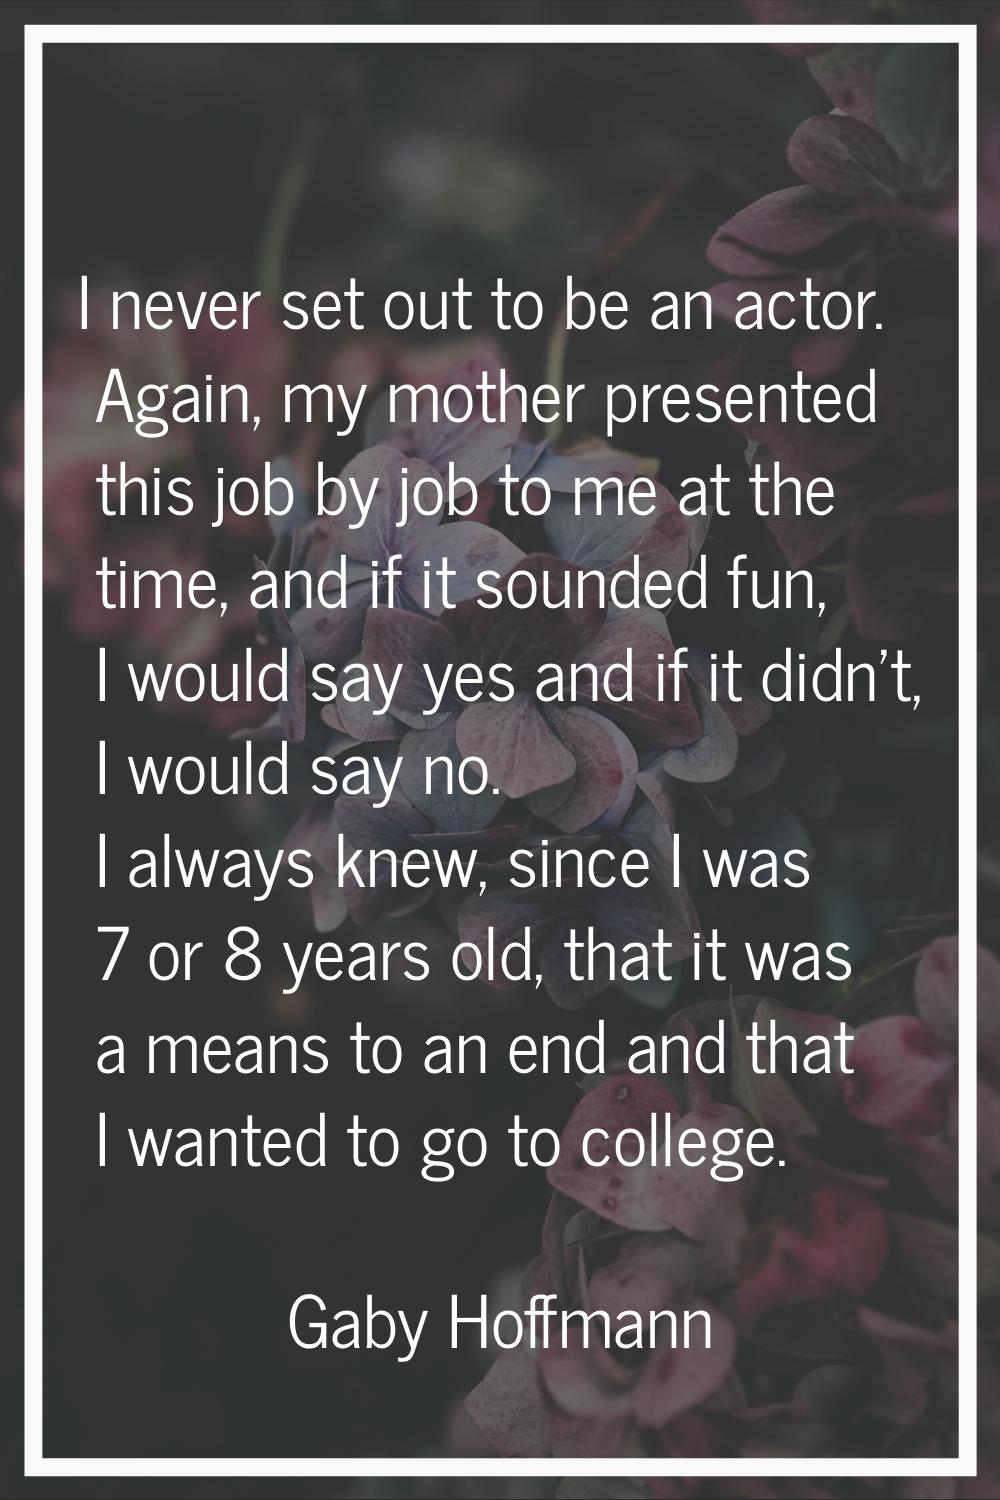 I never set out to be an actor. Again, my mother presented this job by job to me at the time, and i